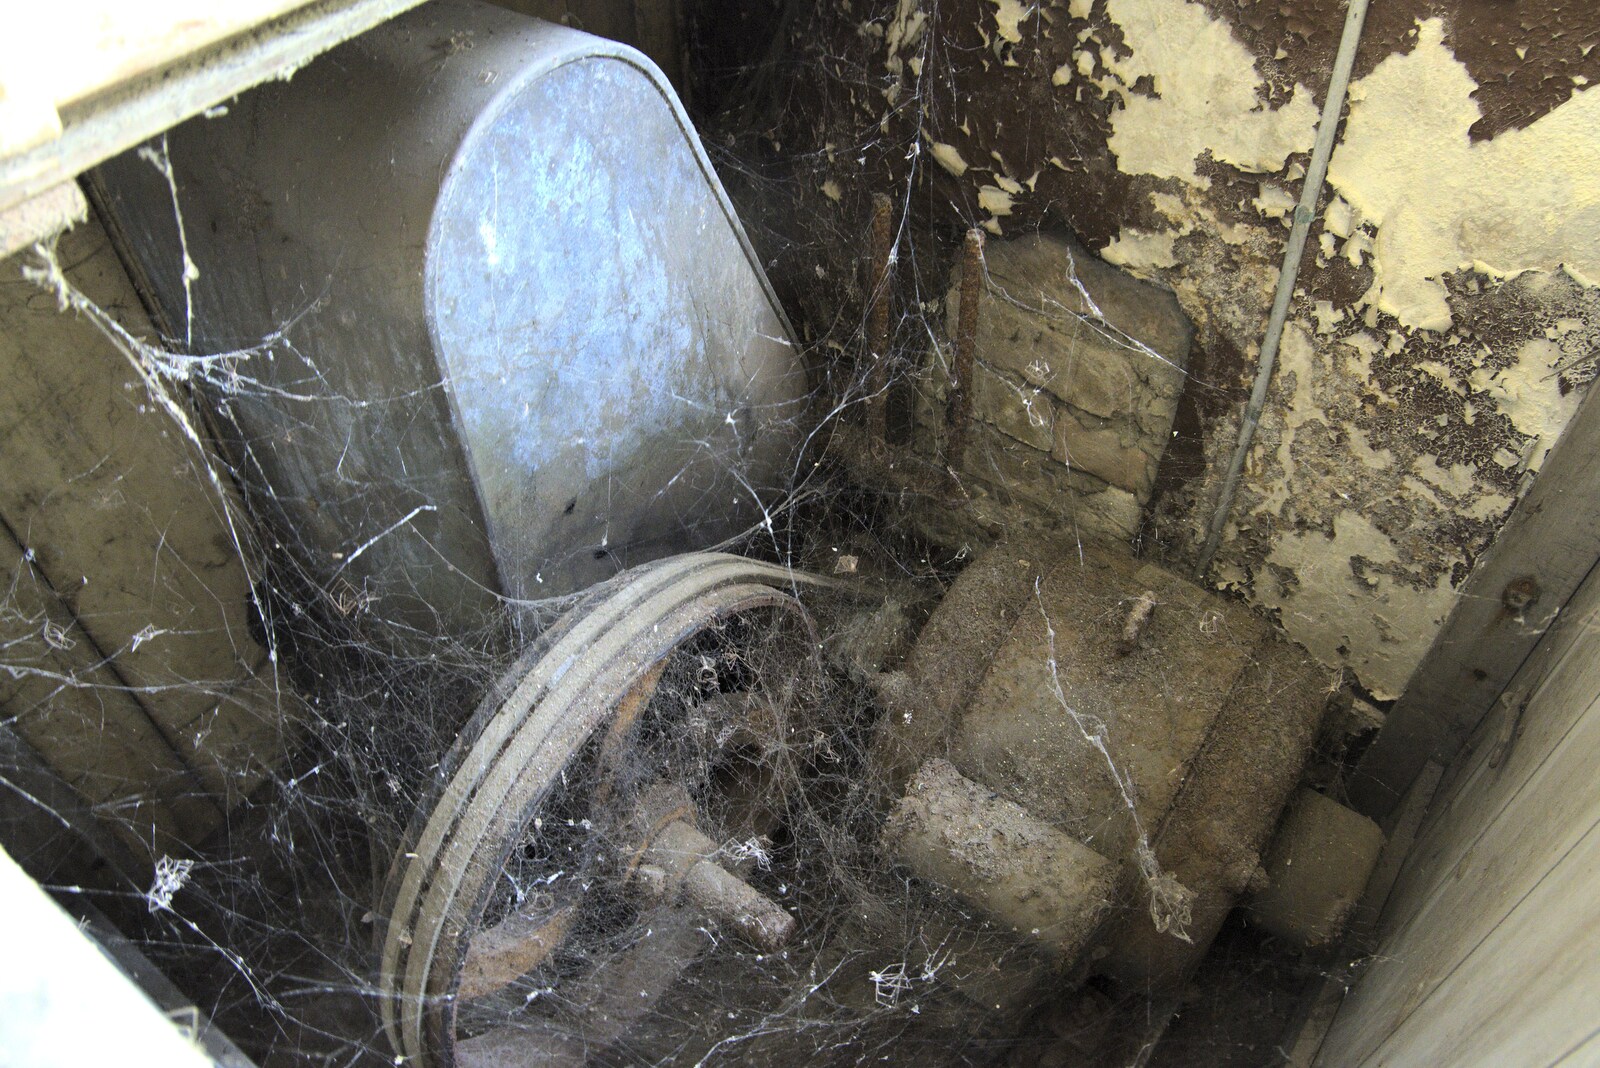 A cobweb-covered water pump from A 1940s Timewarp, Site 4, Bungay Airfield, Flixton, Suffolk - 9th June 2022